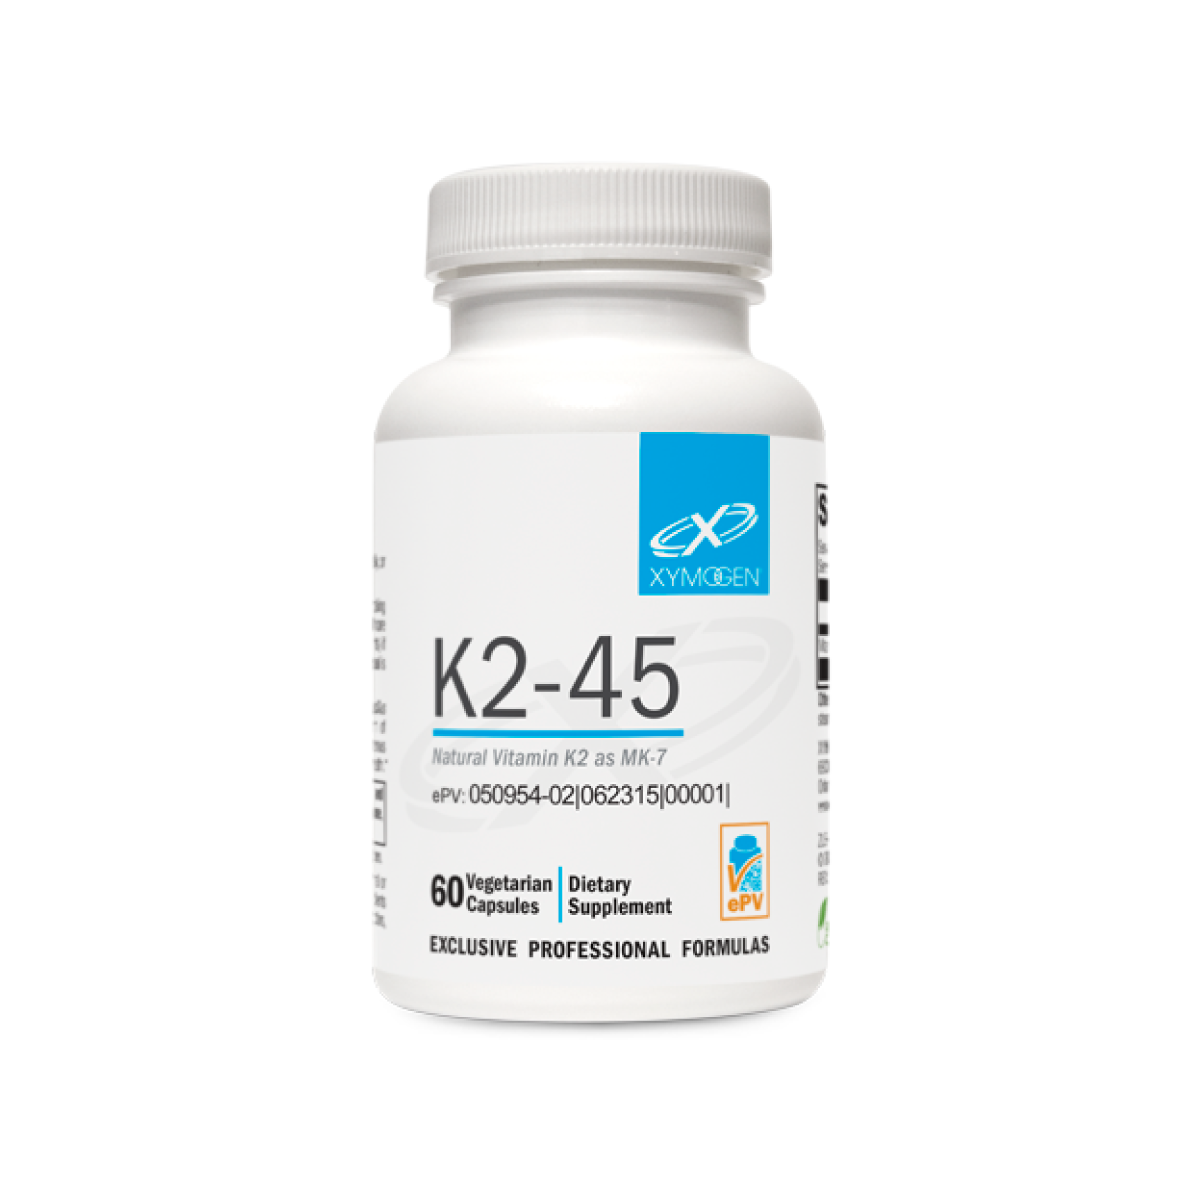 Xymogen K2-45 | 45mcg 60 count, a bioavailable and bioactive form of supplemental vitamin K2, displayed on a white background. This bottle supports bone and heart health.